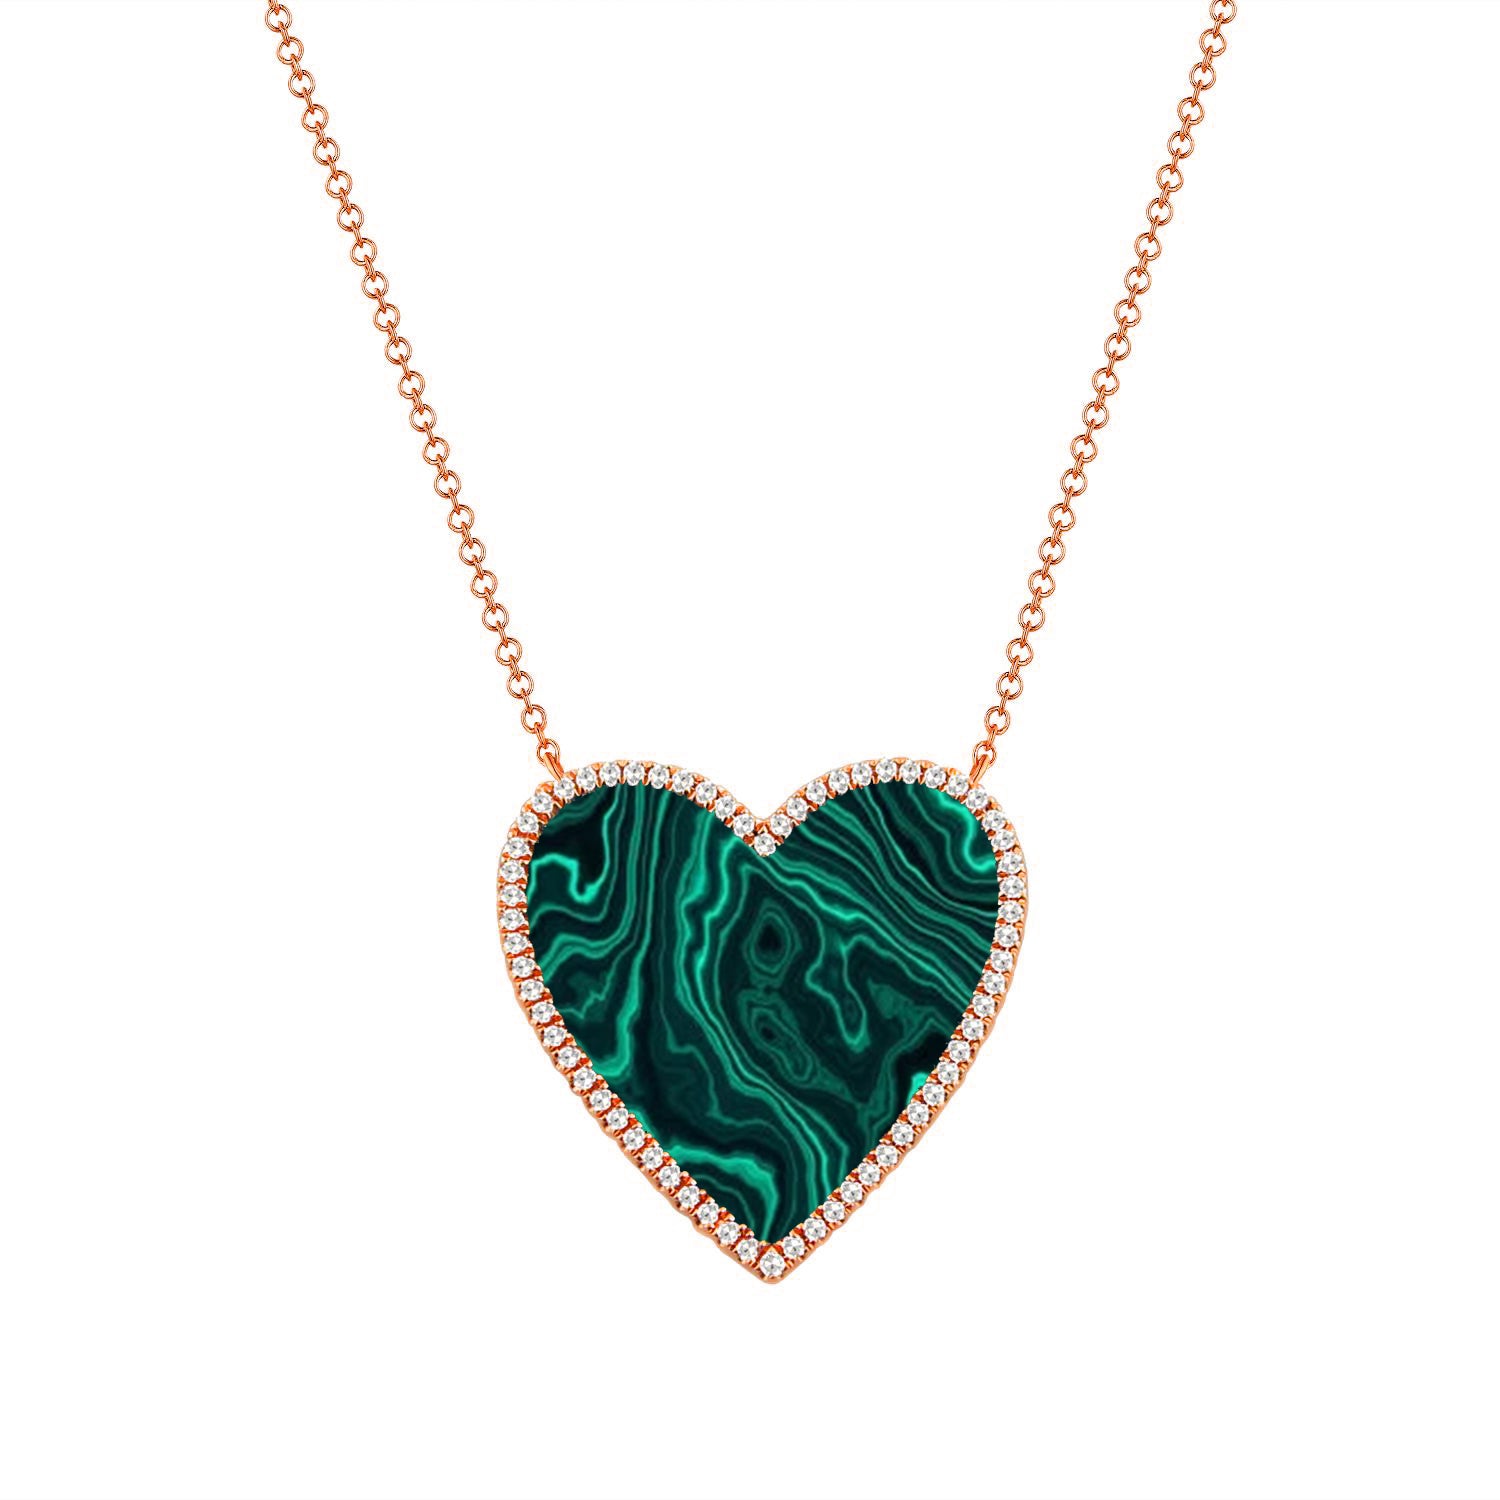 Mini Malachite Heart Necklace With Rainbow Pave, Malachite Heart Necklace,  Rainbow Heart Necklace, Silver or Gold - Etsy